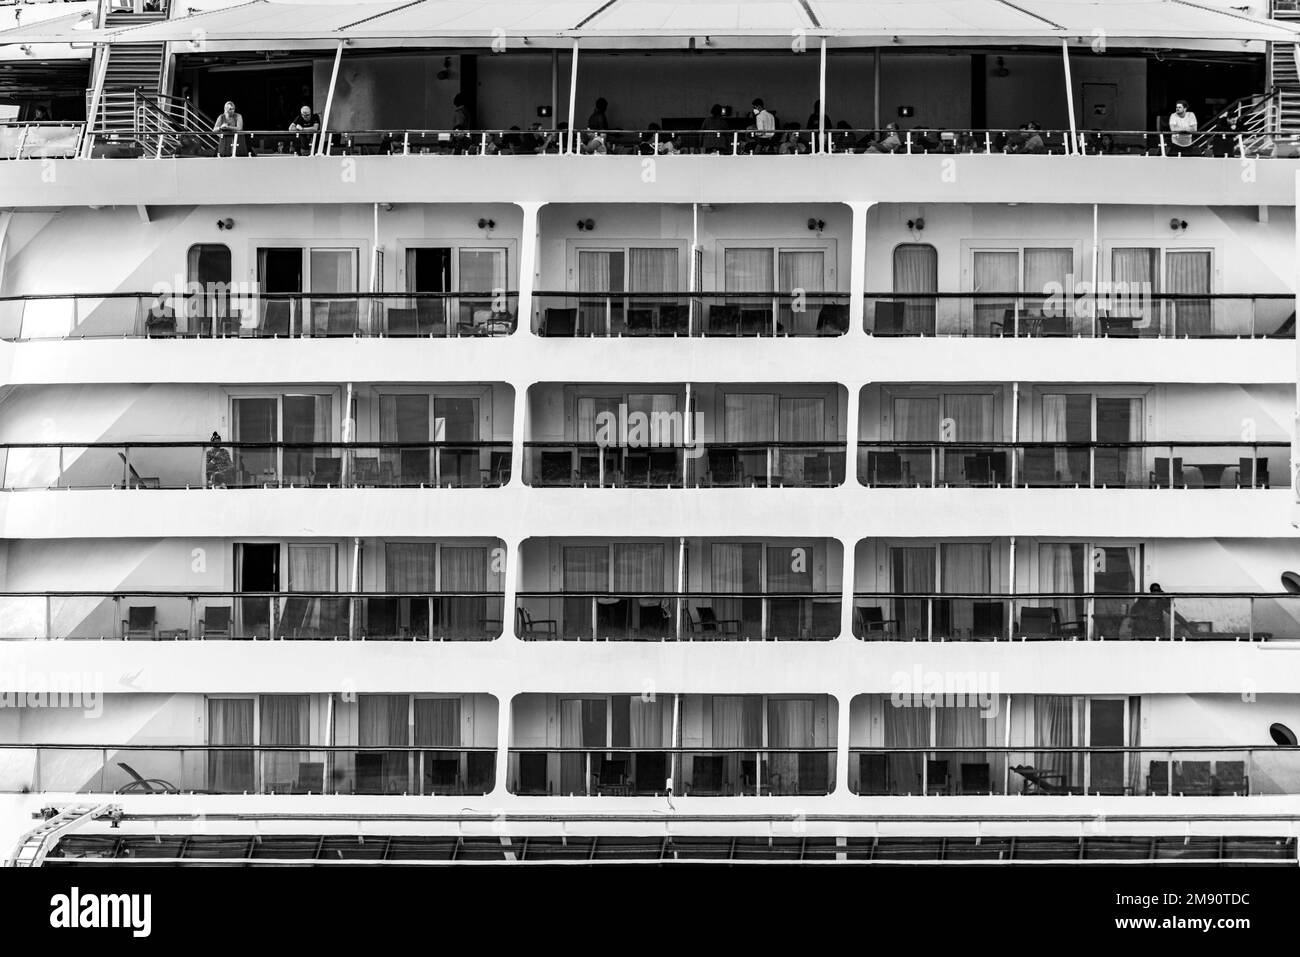 The aft of a luxury cruise ship Stock Photo